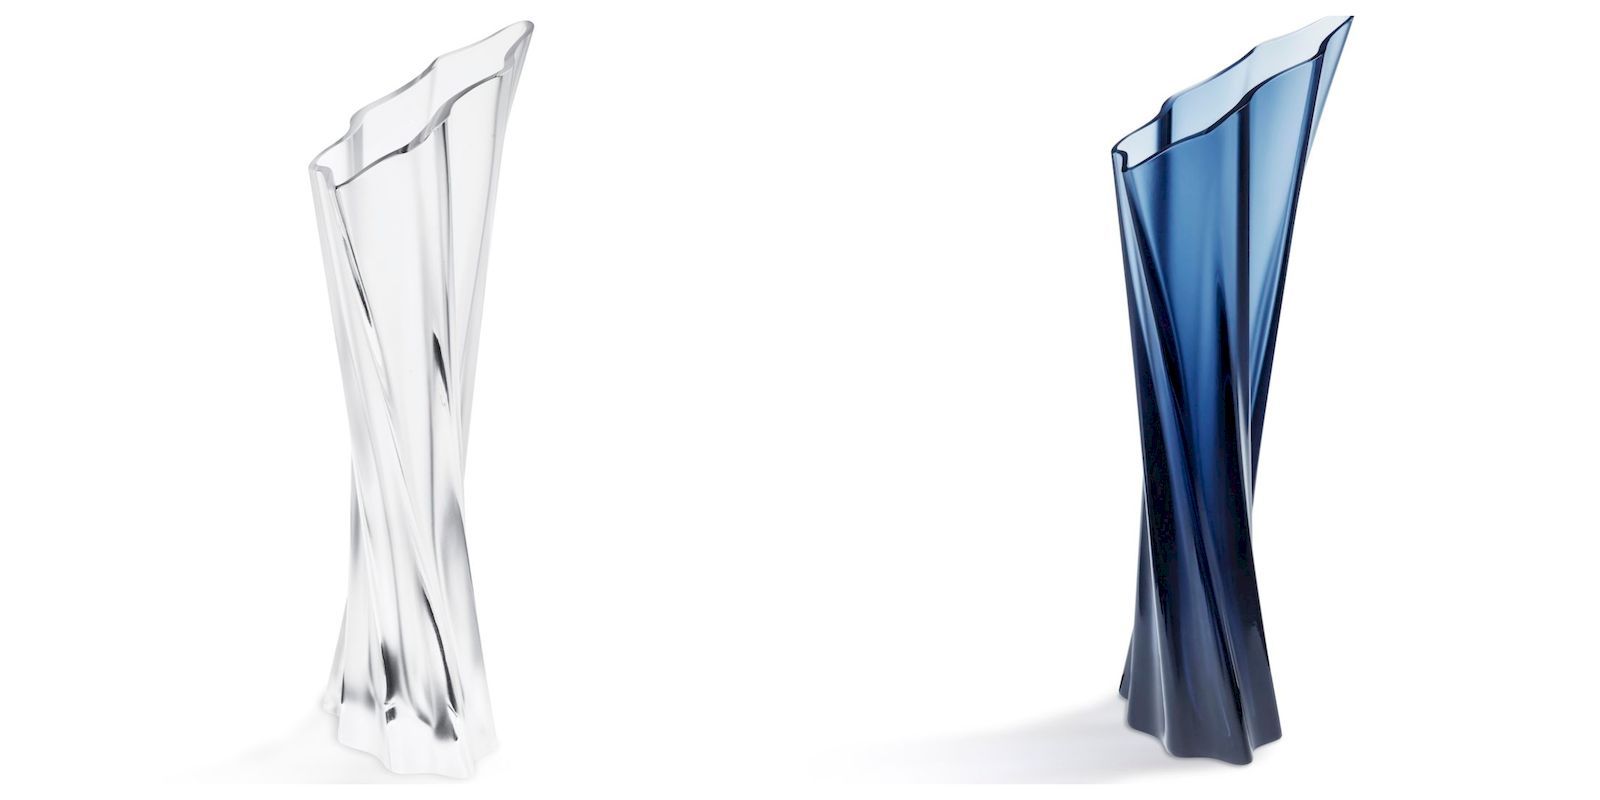 The Tandrillah crystal vase from Lalique is a design marvel